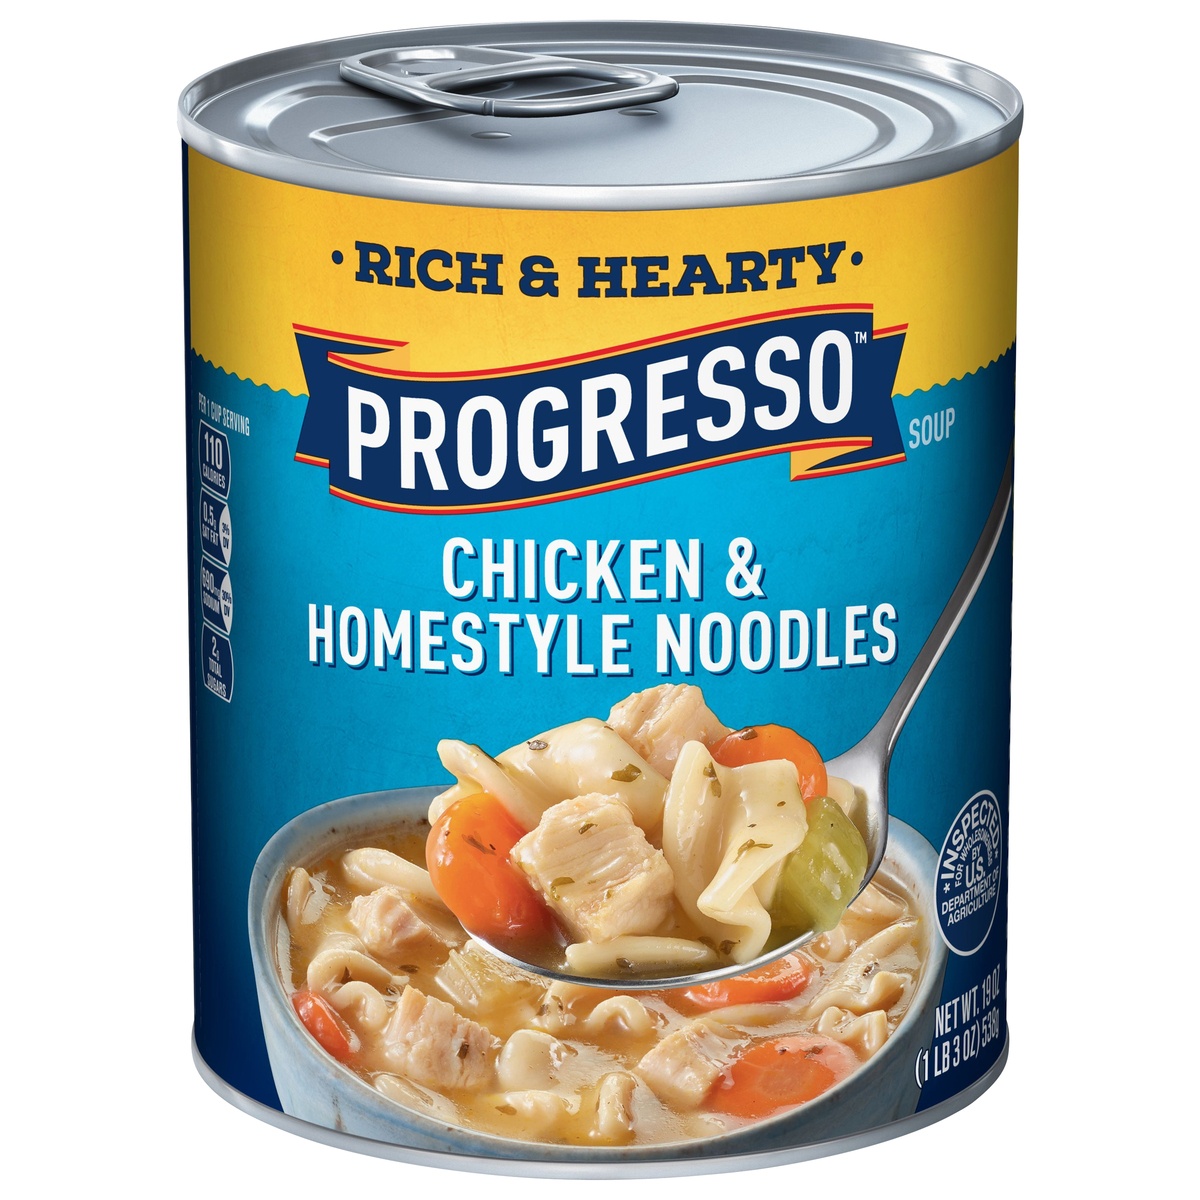 slide 11 of 11, Progresso Rich & Hearty Chicken & Homestyle Noodles SoupCan, 19 oz